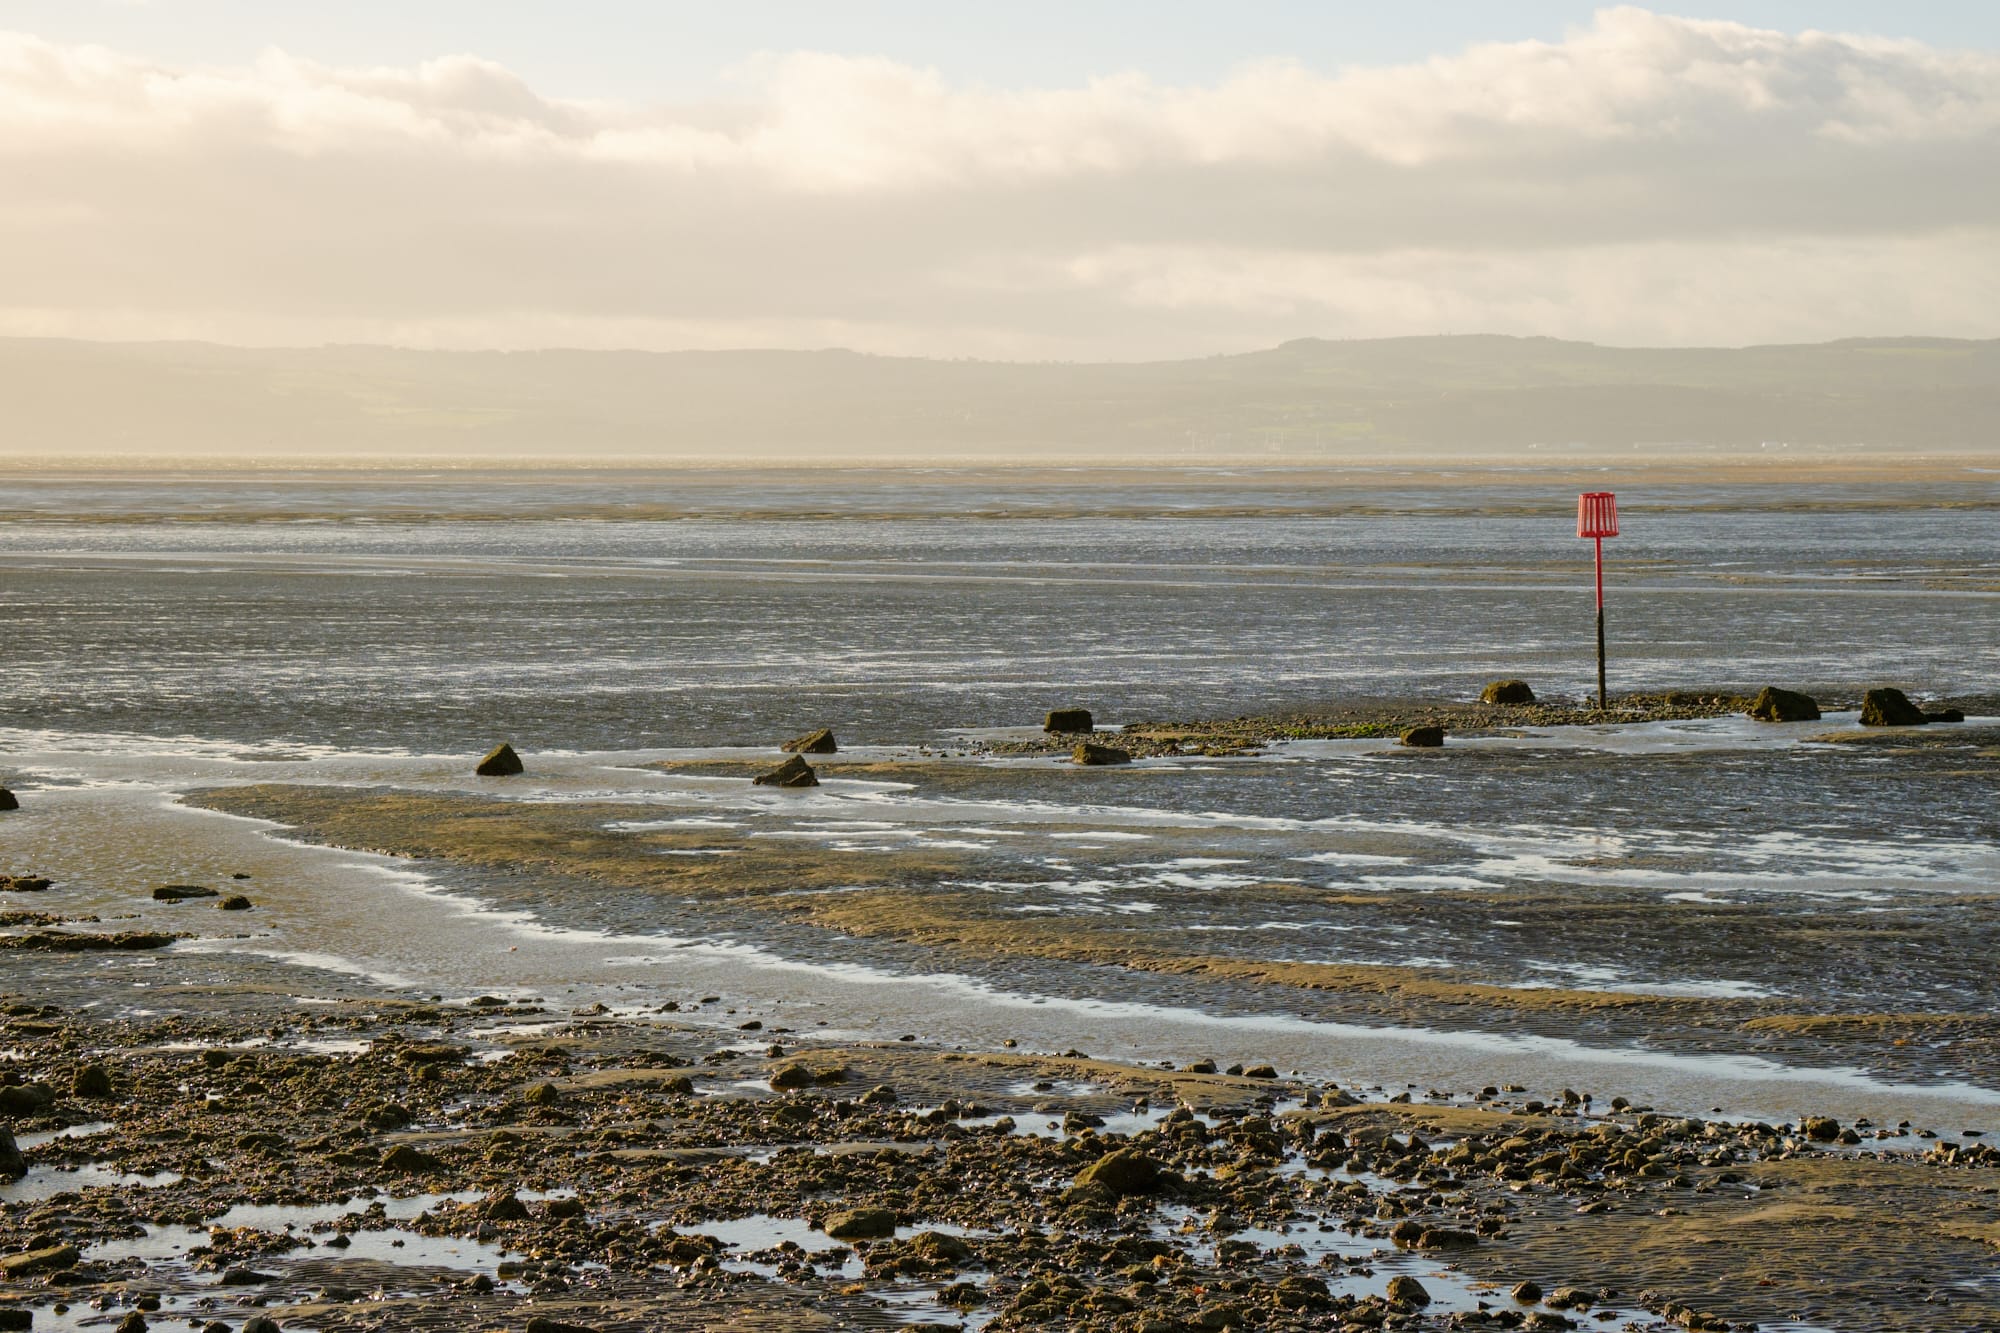 looking out over the mouth of the River Dee from West Kirby